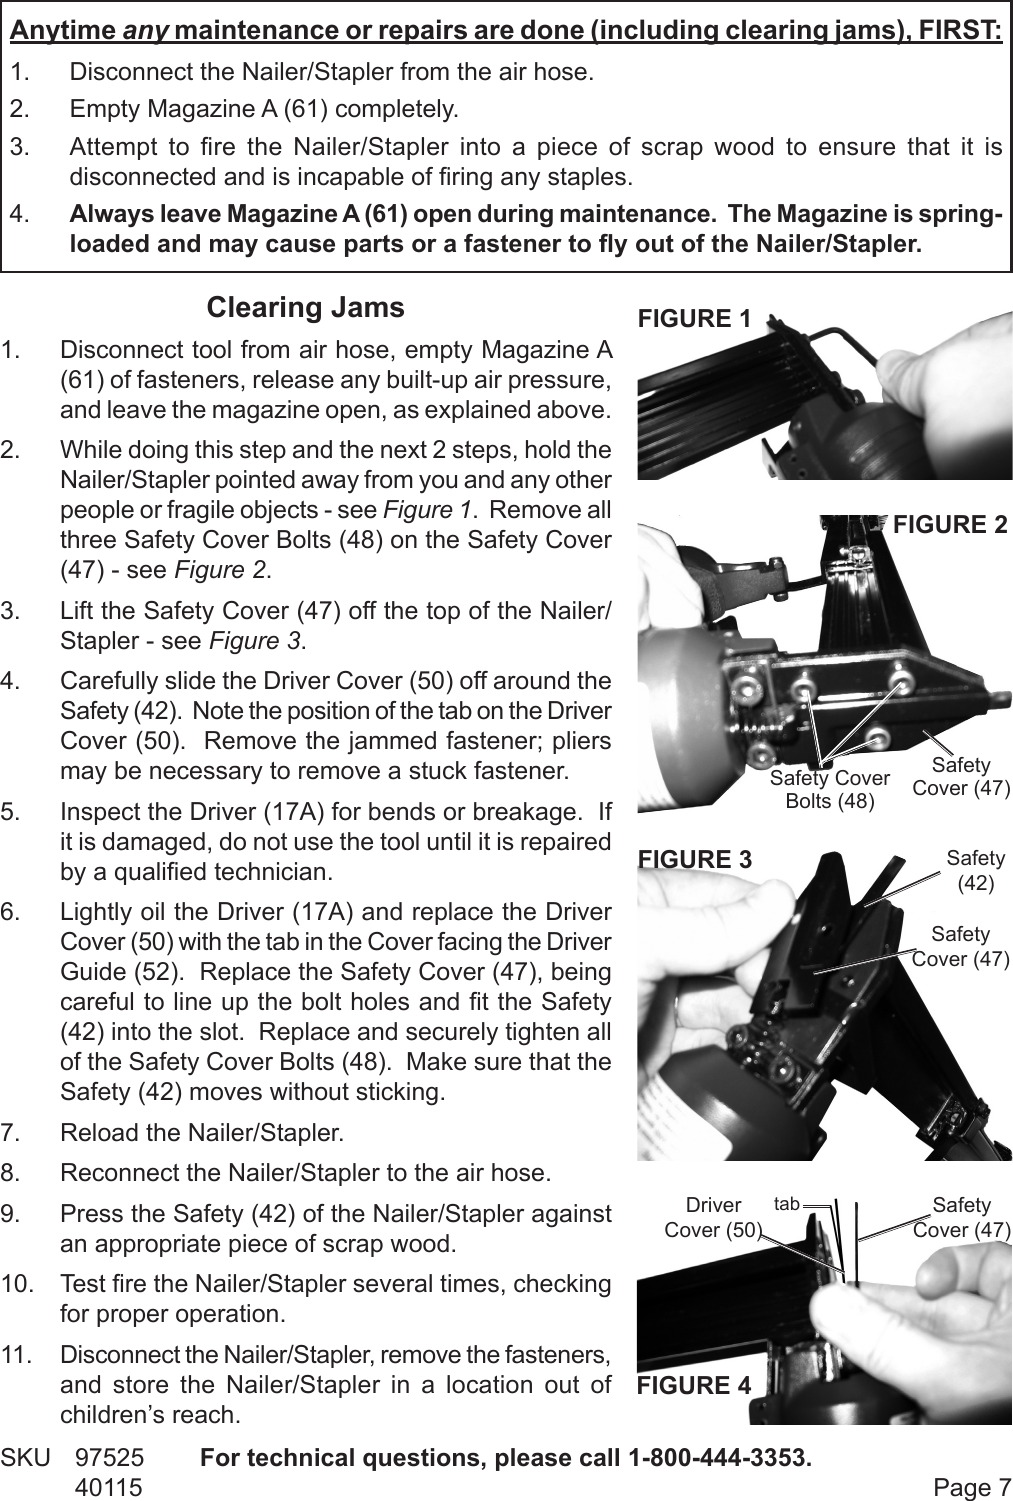 Page 7 of 11 - Central-Pneumatic Central-Pneumatic-Nail-Gun-40115-Users-Manual-  Central-pneumatic-nail-gun-40115-users-manual